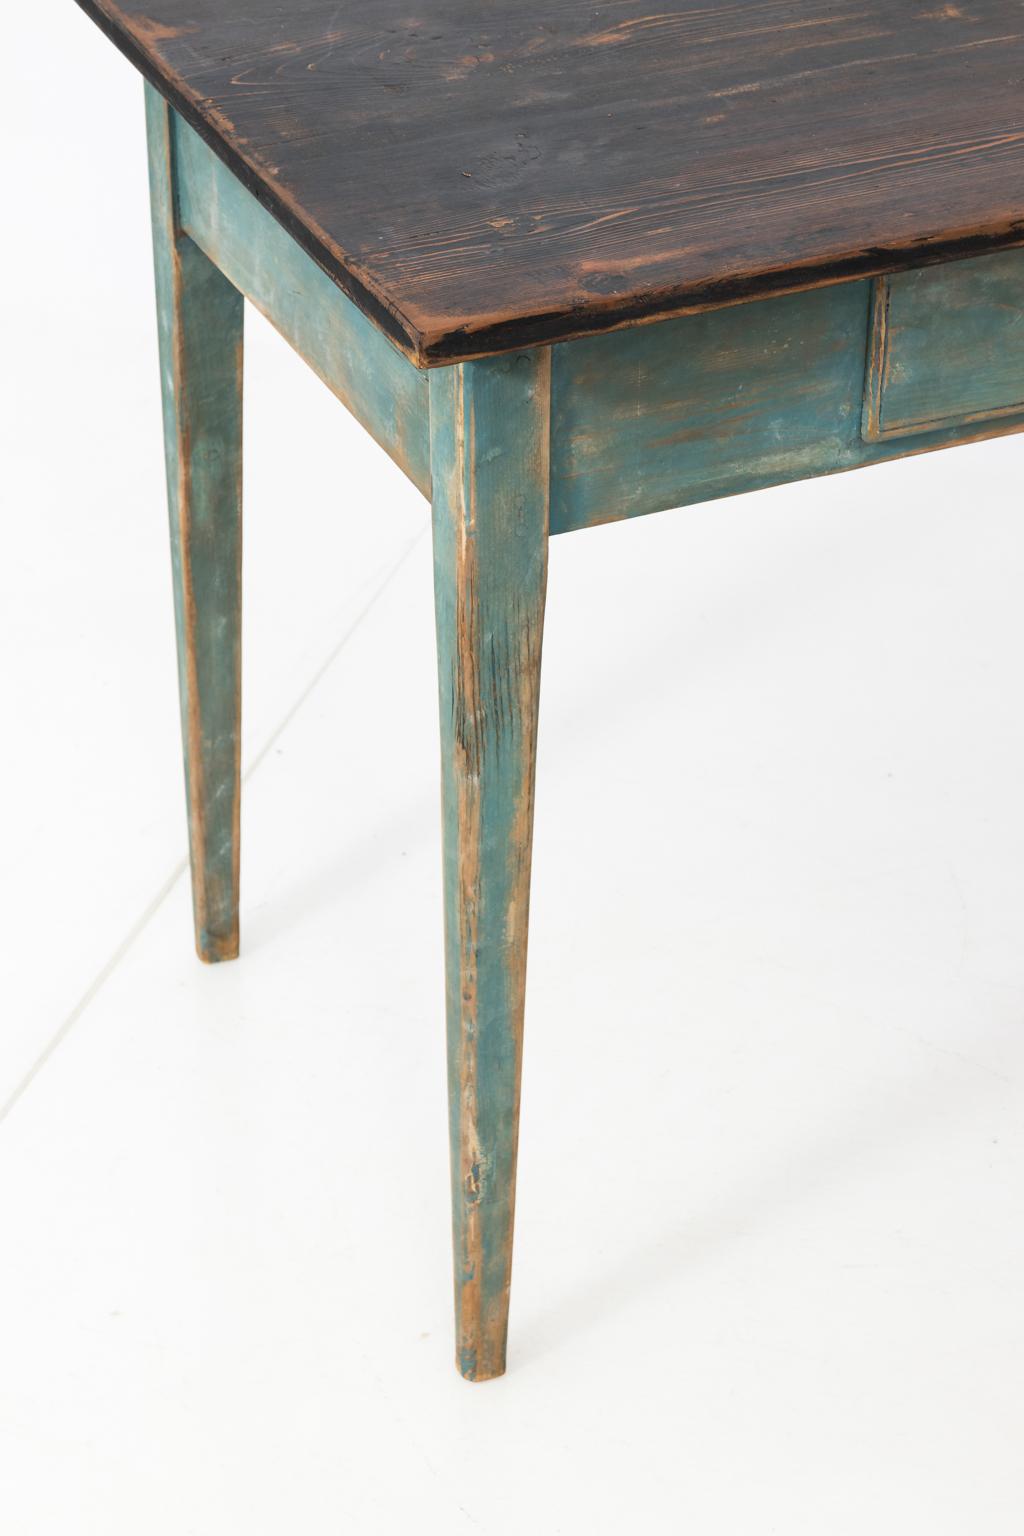 Mid-1800s Blue Painted Table with Black Painted Top (Mittleres 19. Jahrhundert) im Angebot